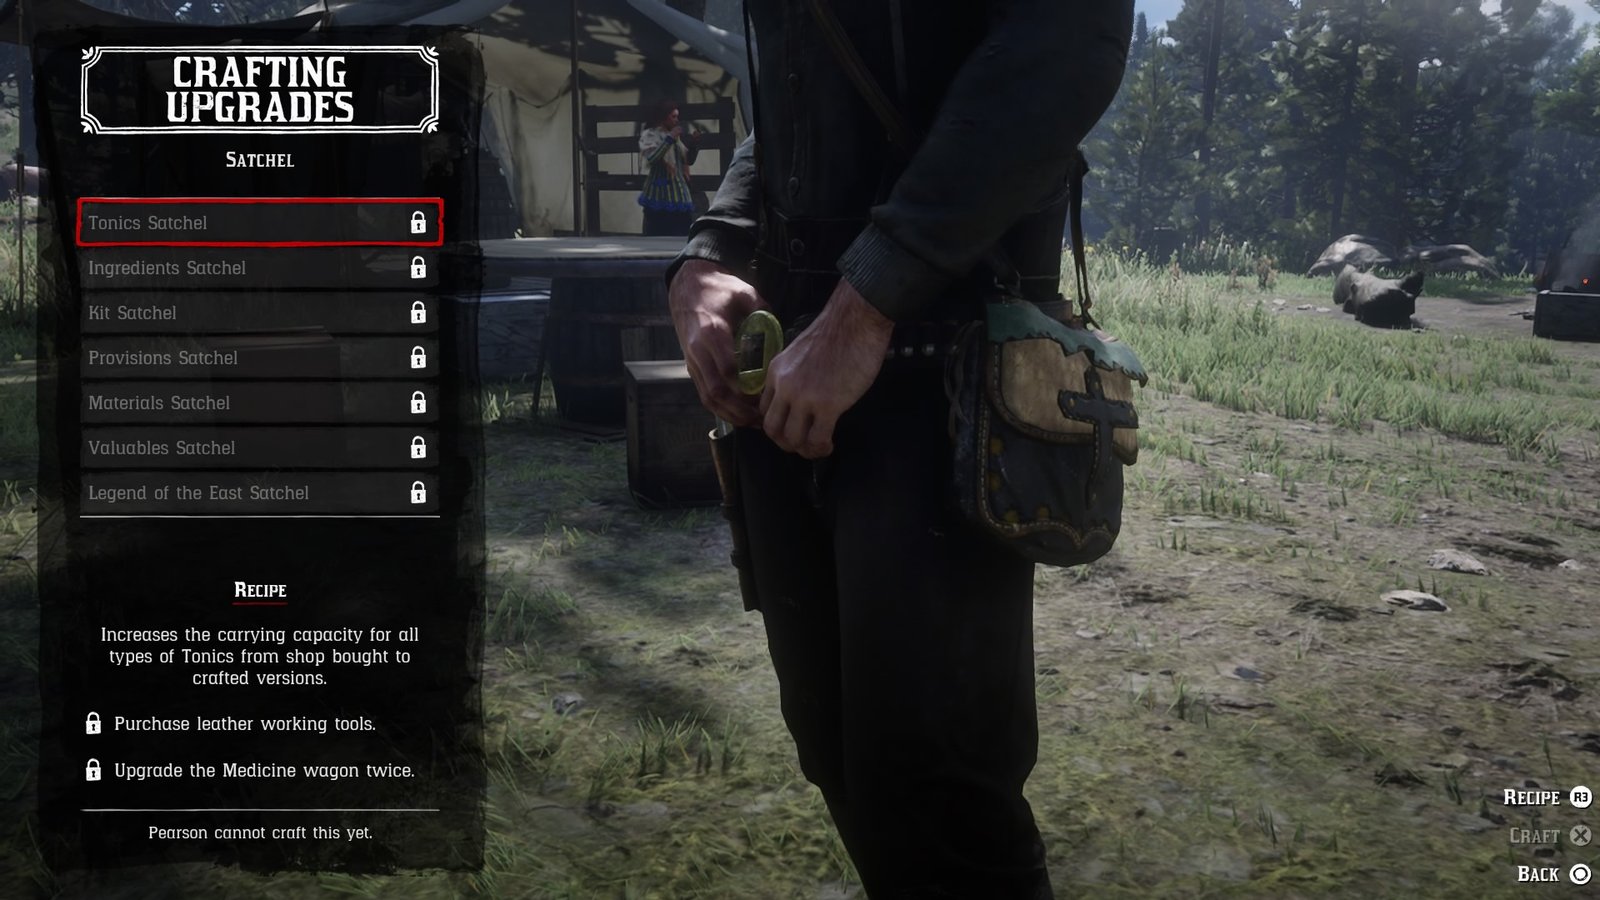 Red Dead Redemption 2 Satchel Crafting Guide